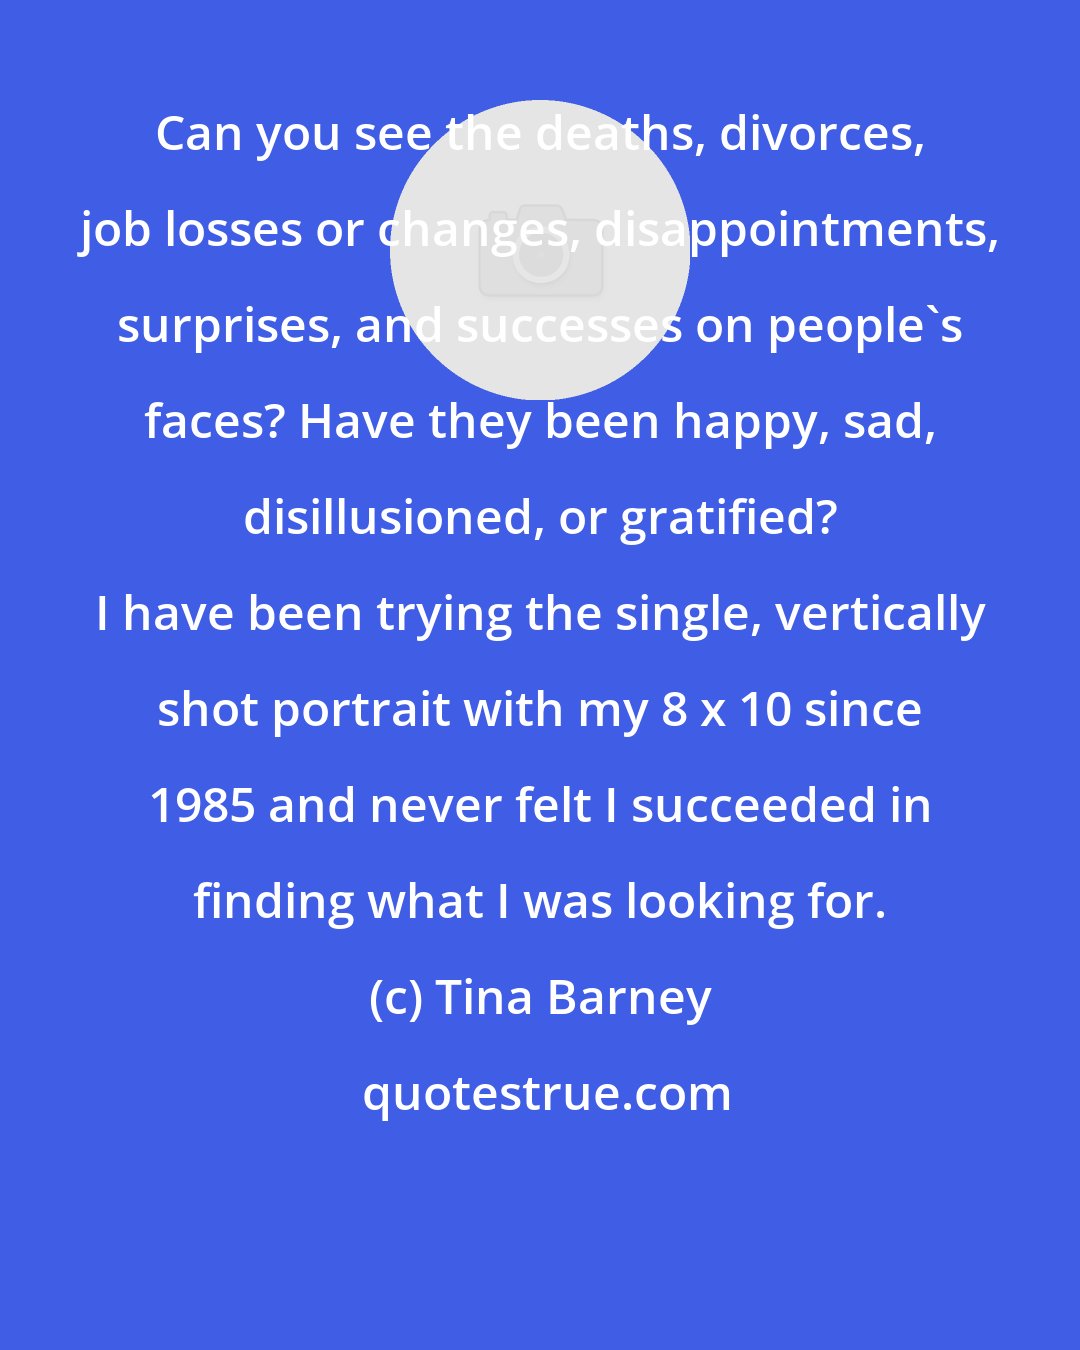 Tina Barney: Can you see the deaths, divorces, job losses or changes, disappointments, surprises, and successes on people's faces? Have they been happy, sad, disillusioned, or gratified? I have been trying the single, vertically shot portrait with my 8 x 10 since 1985 and never felt I succeeded in finding what I was looking for.